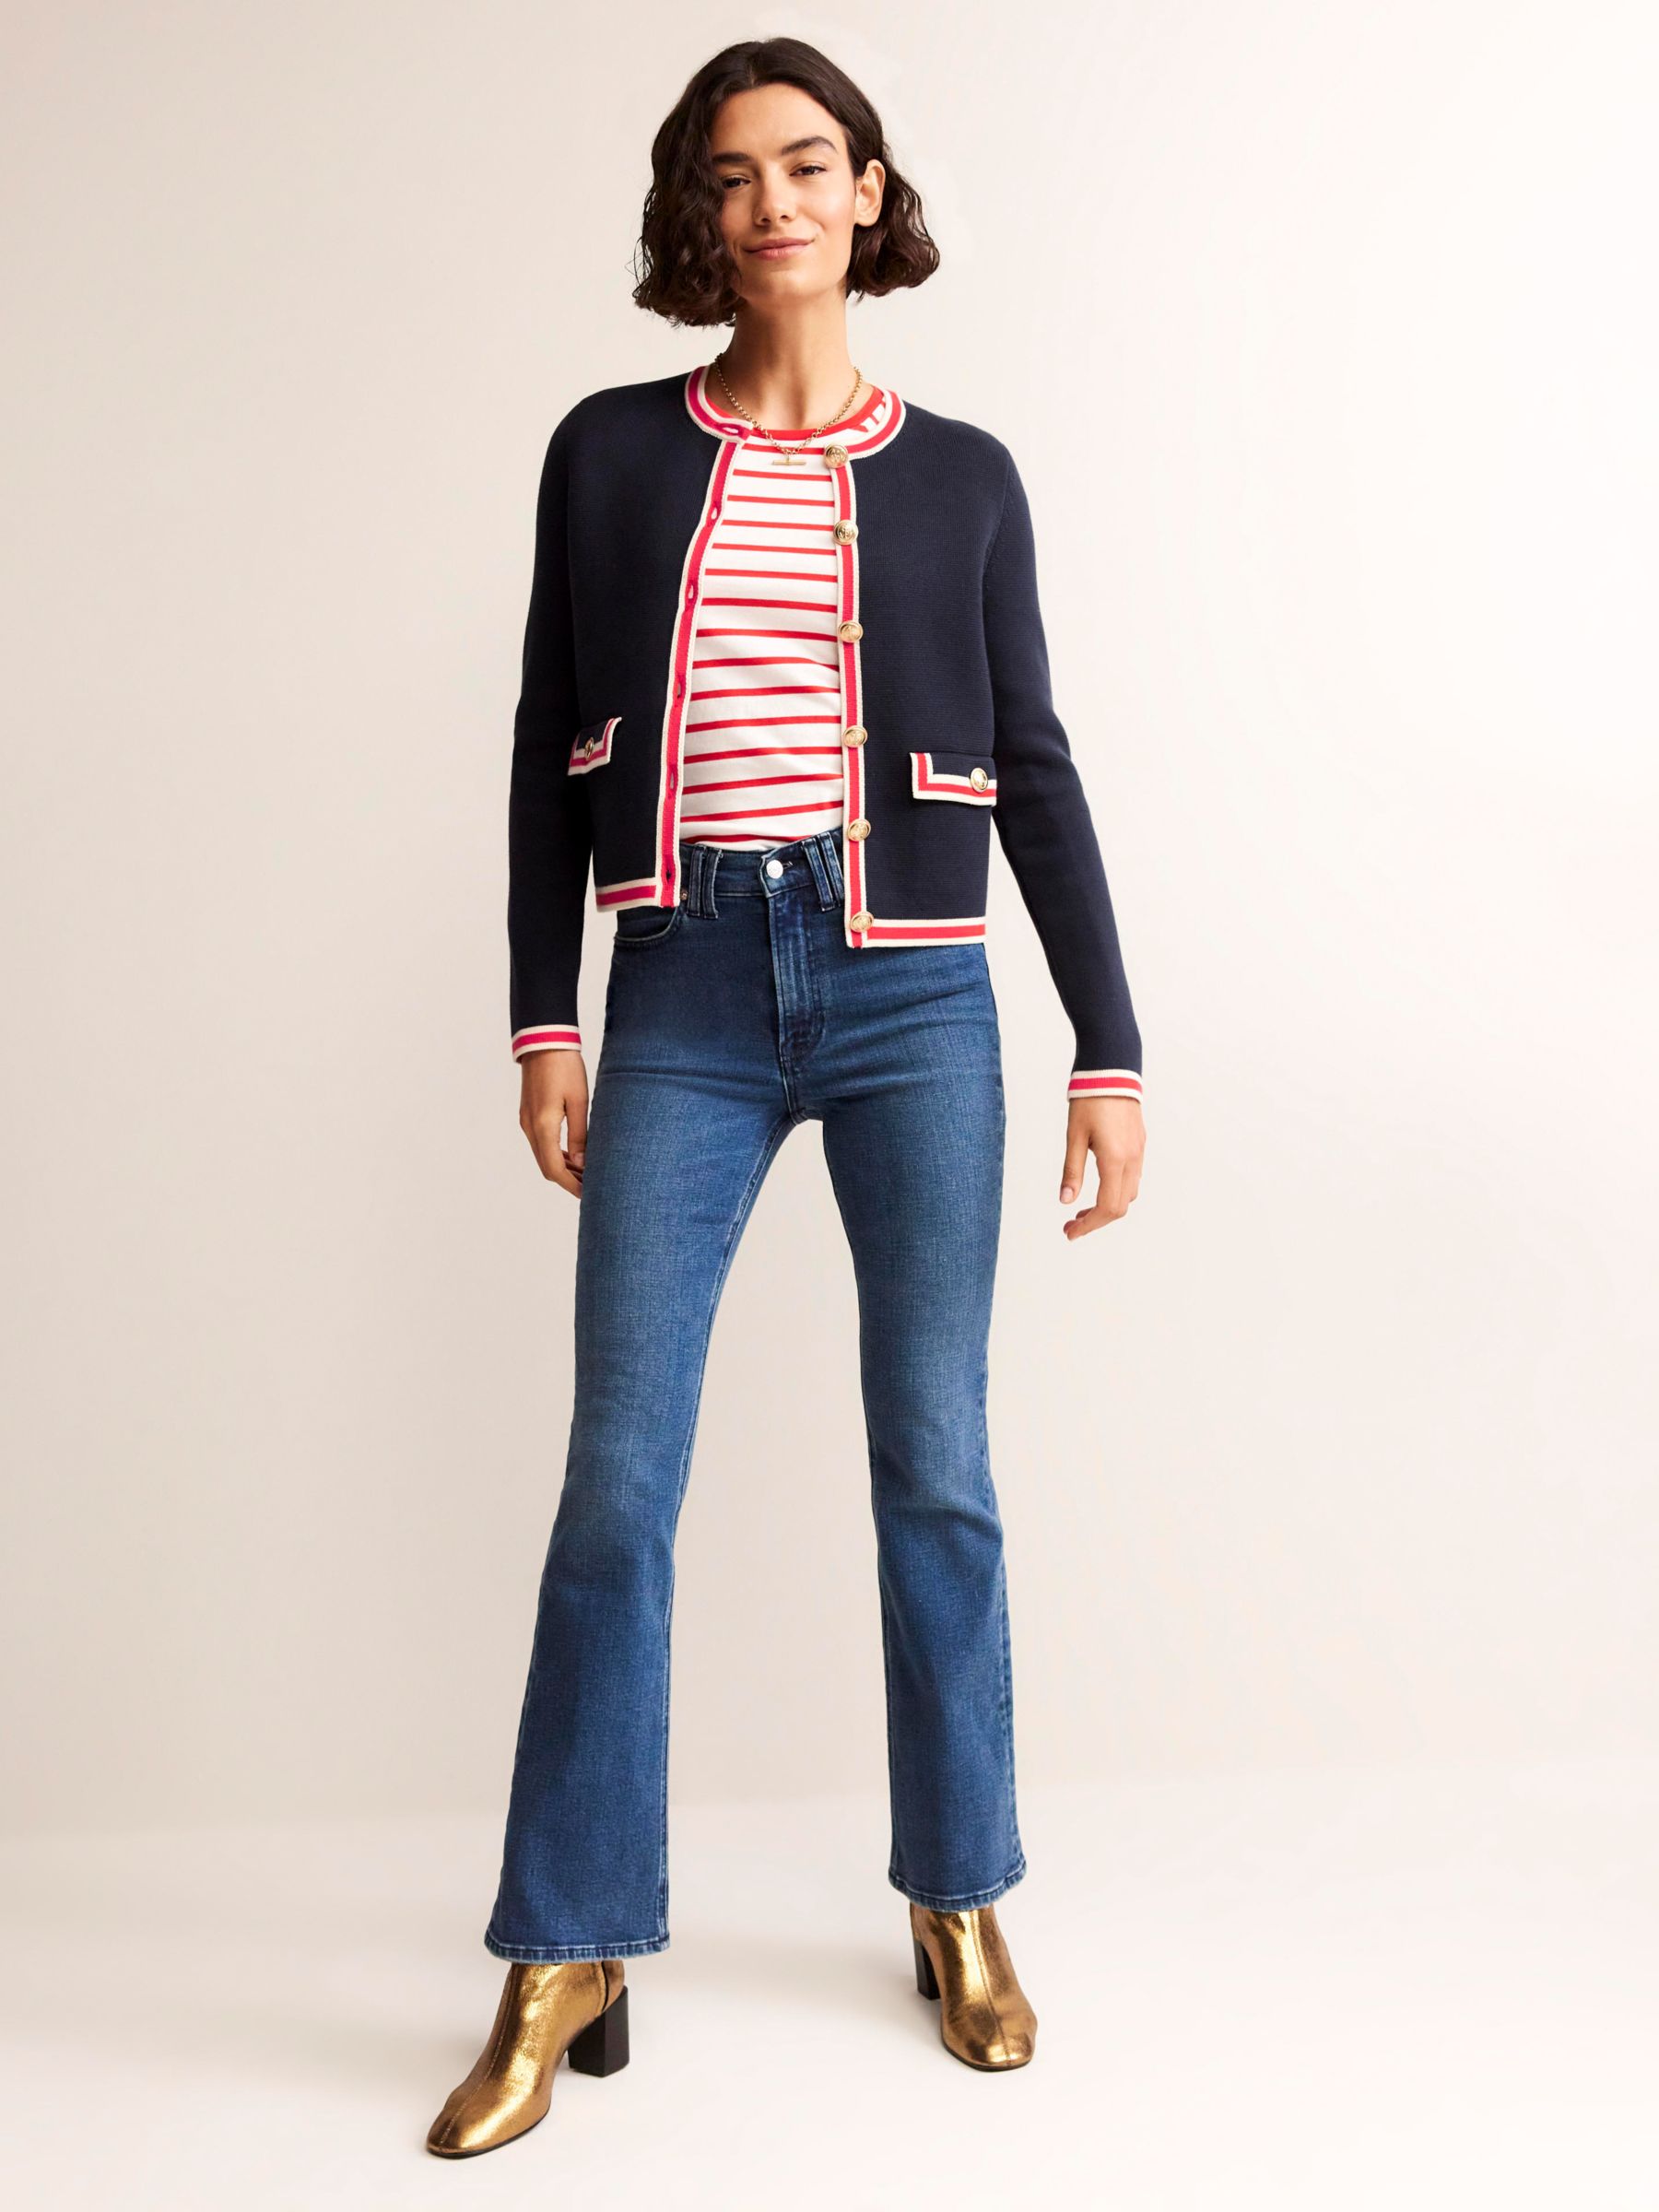 Buy Boden Holly Cropped Knitted Jacket, Navy/Multi Online at johnlewis.com